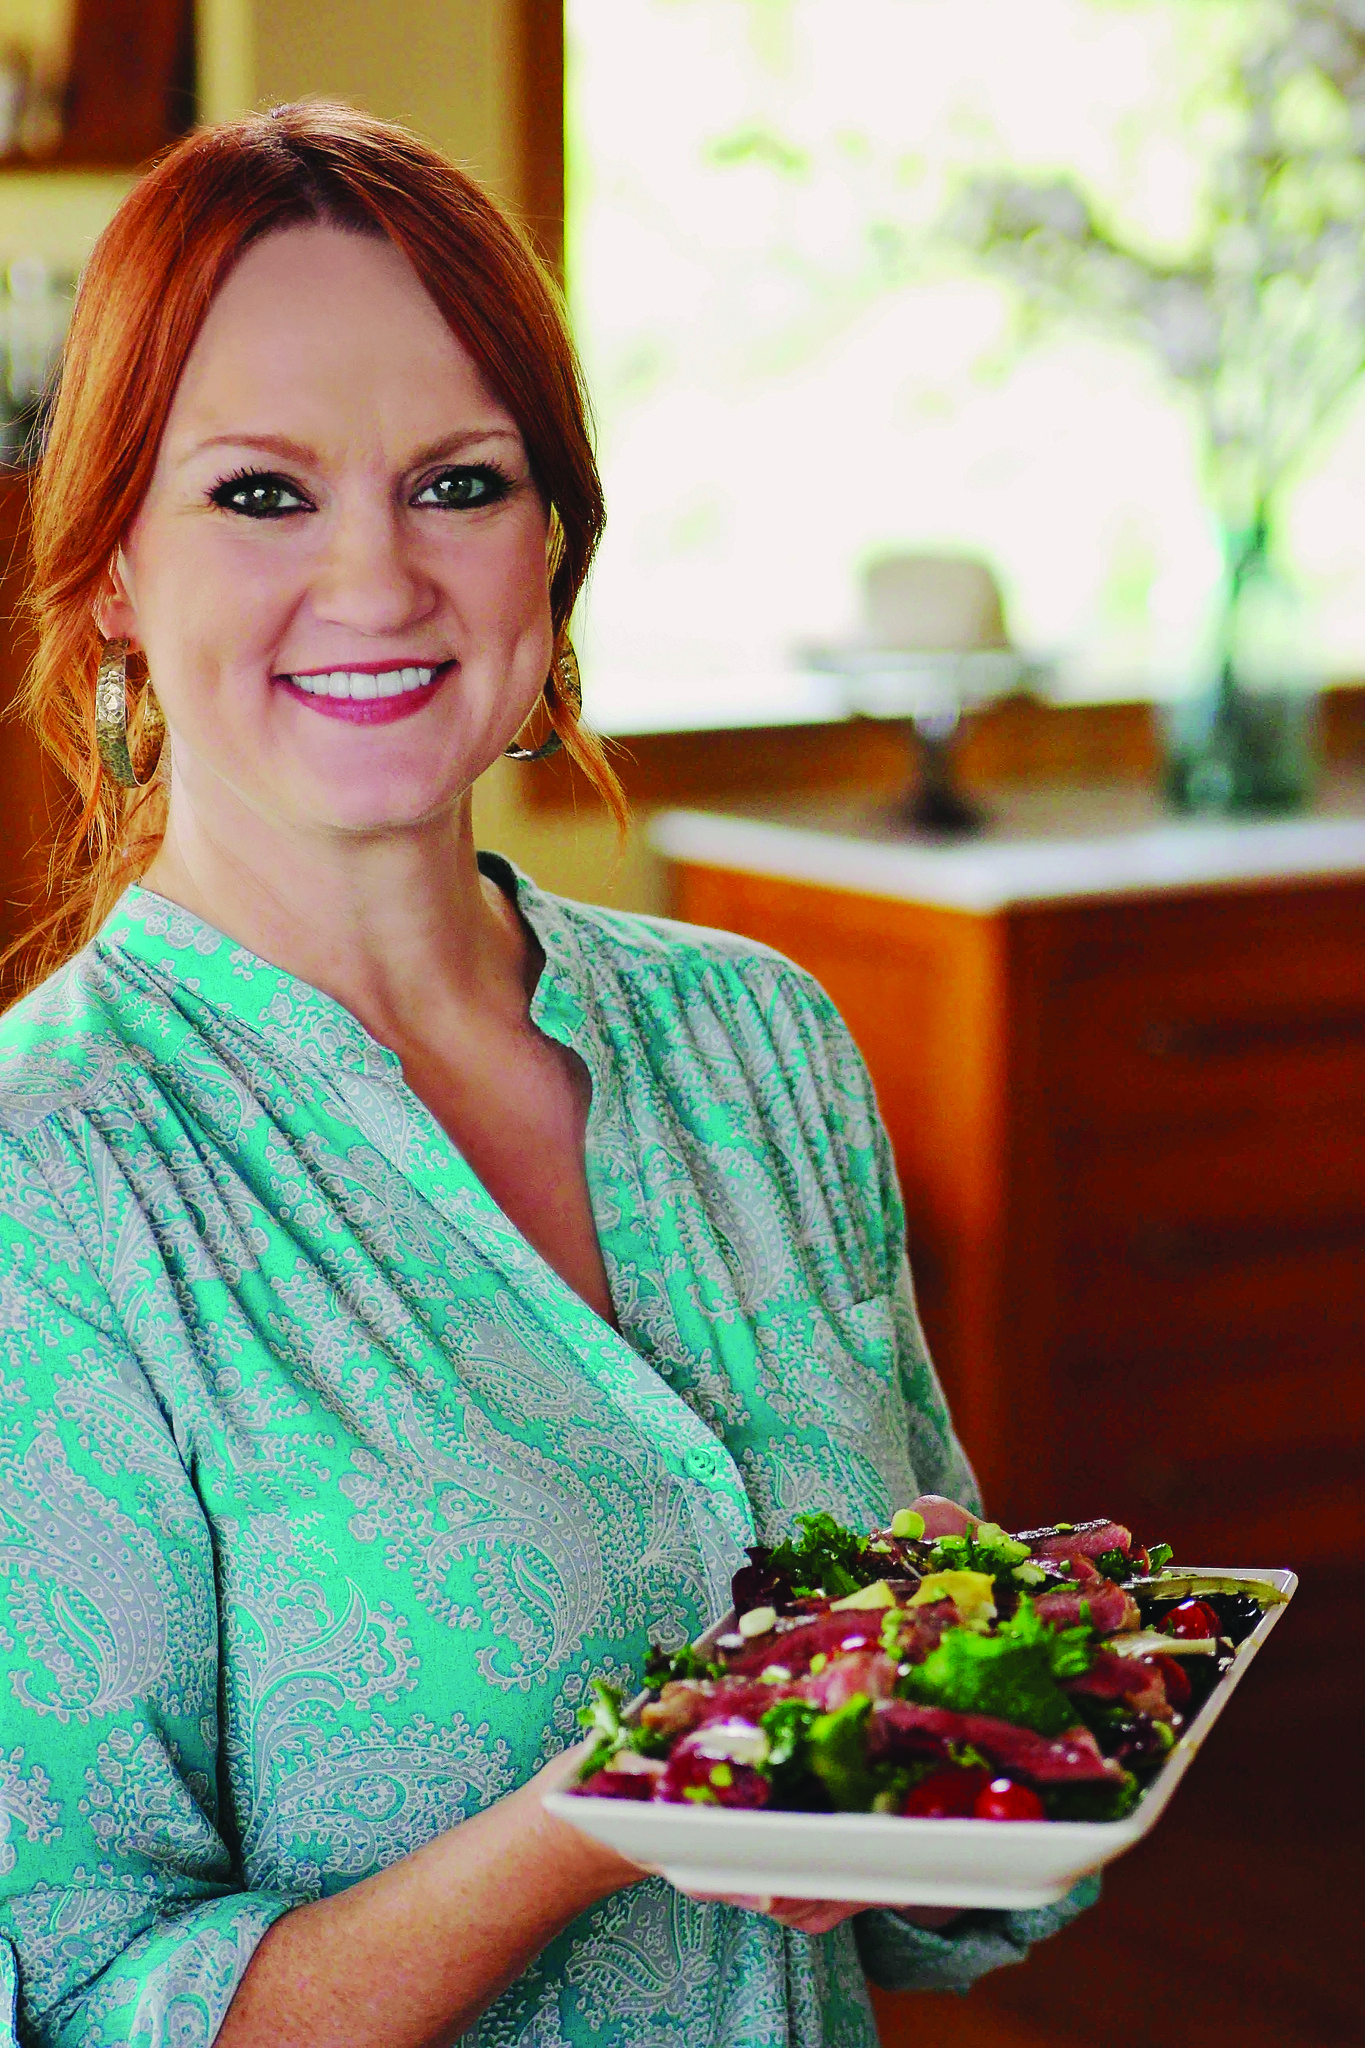 Ree Drummond can help with dinner - Chicago Tribune